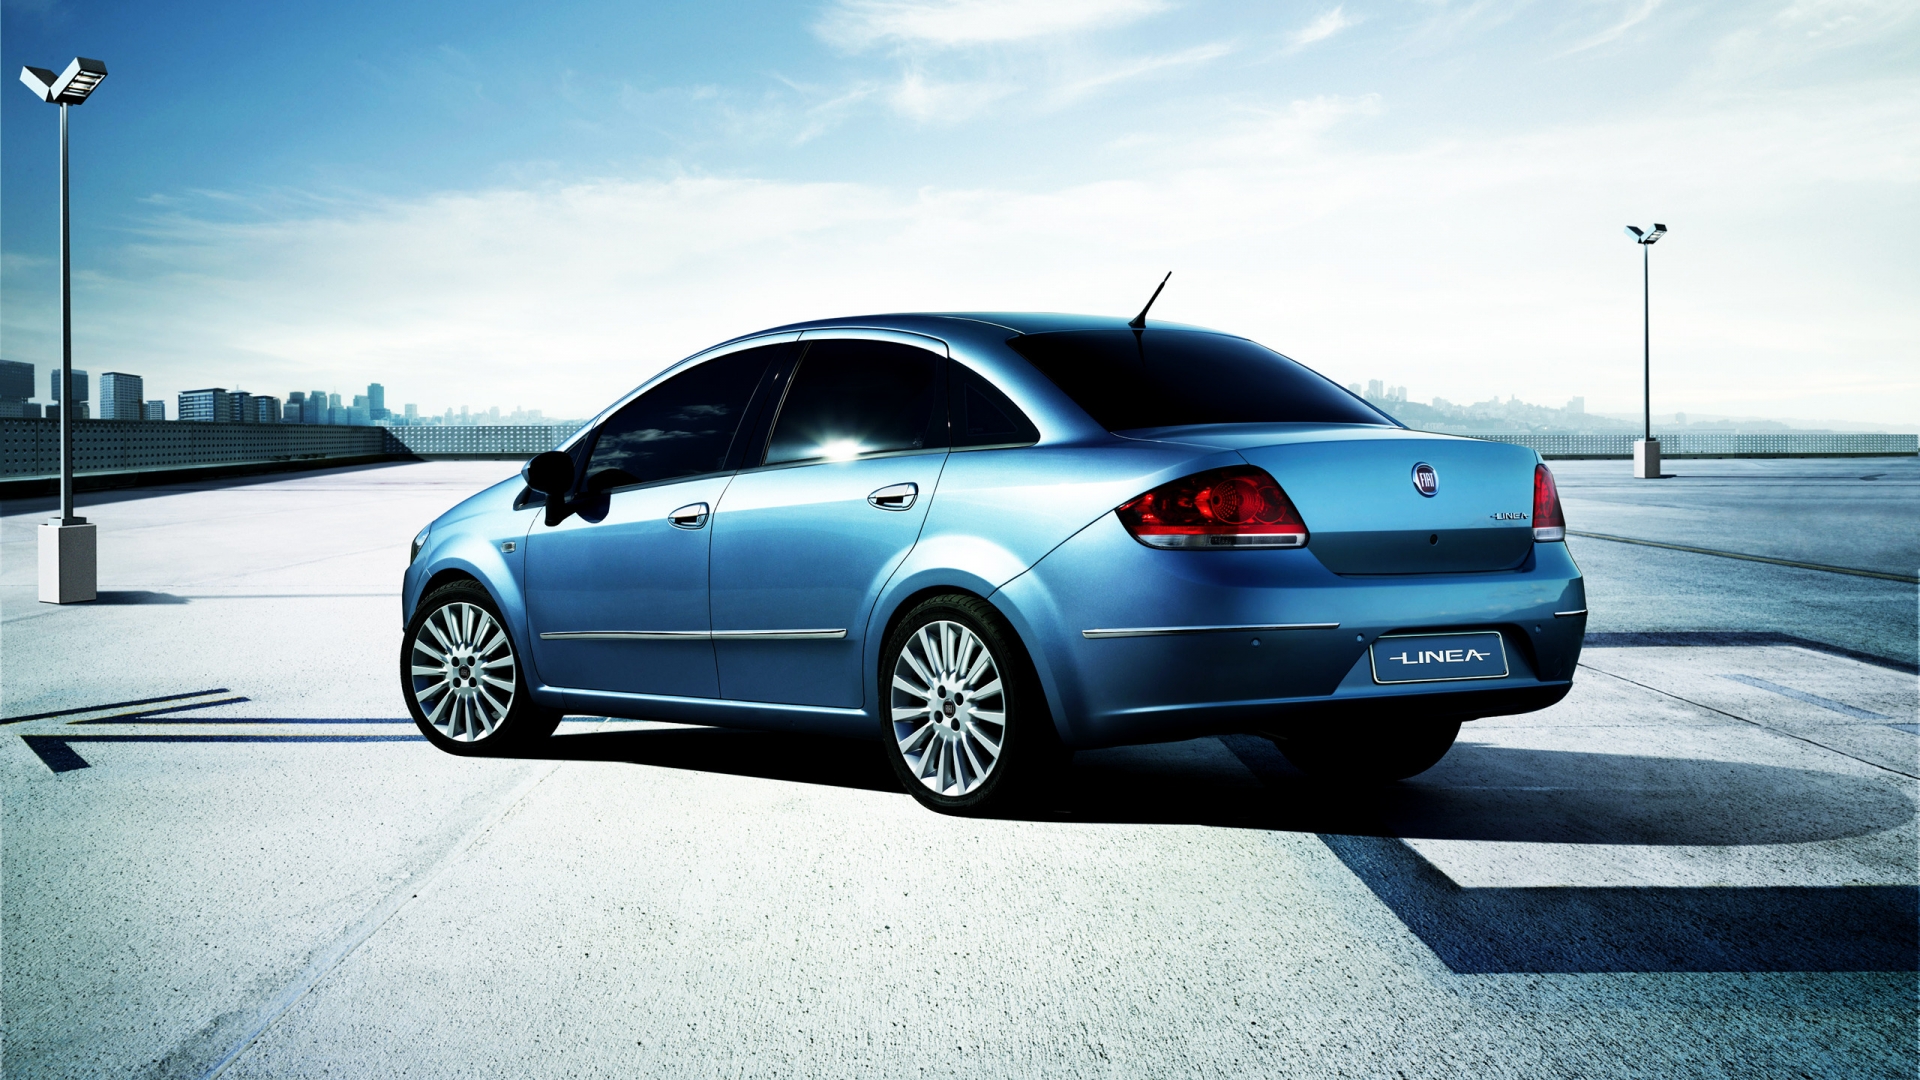 Fiat Linea 2009 Rear for 1920 x 1080 HDTV 1080p resolution